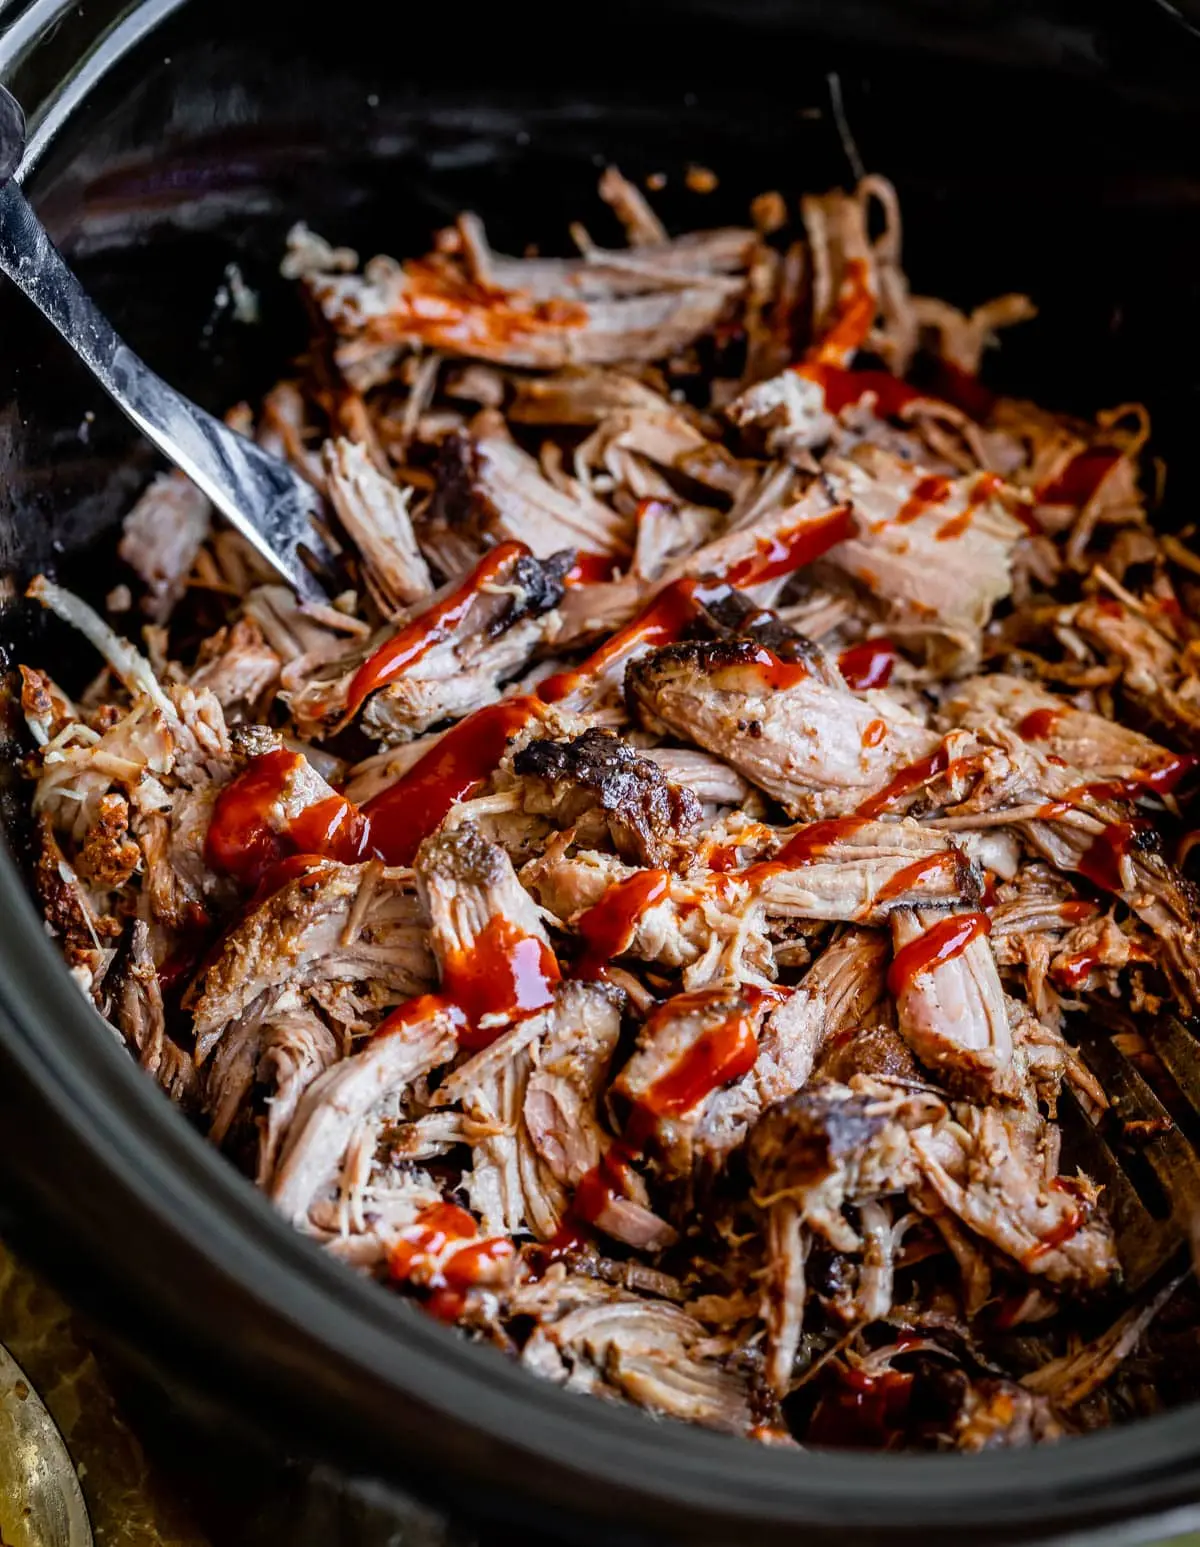 smoked pulled pork in crock pot - Is pulled pork better in slow cooker or oven